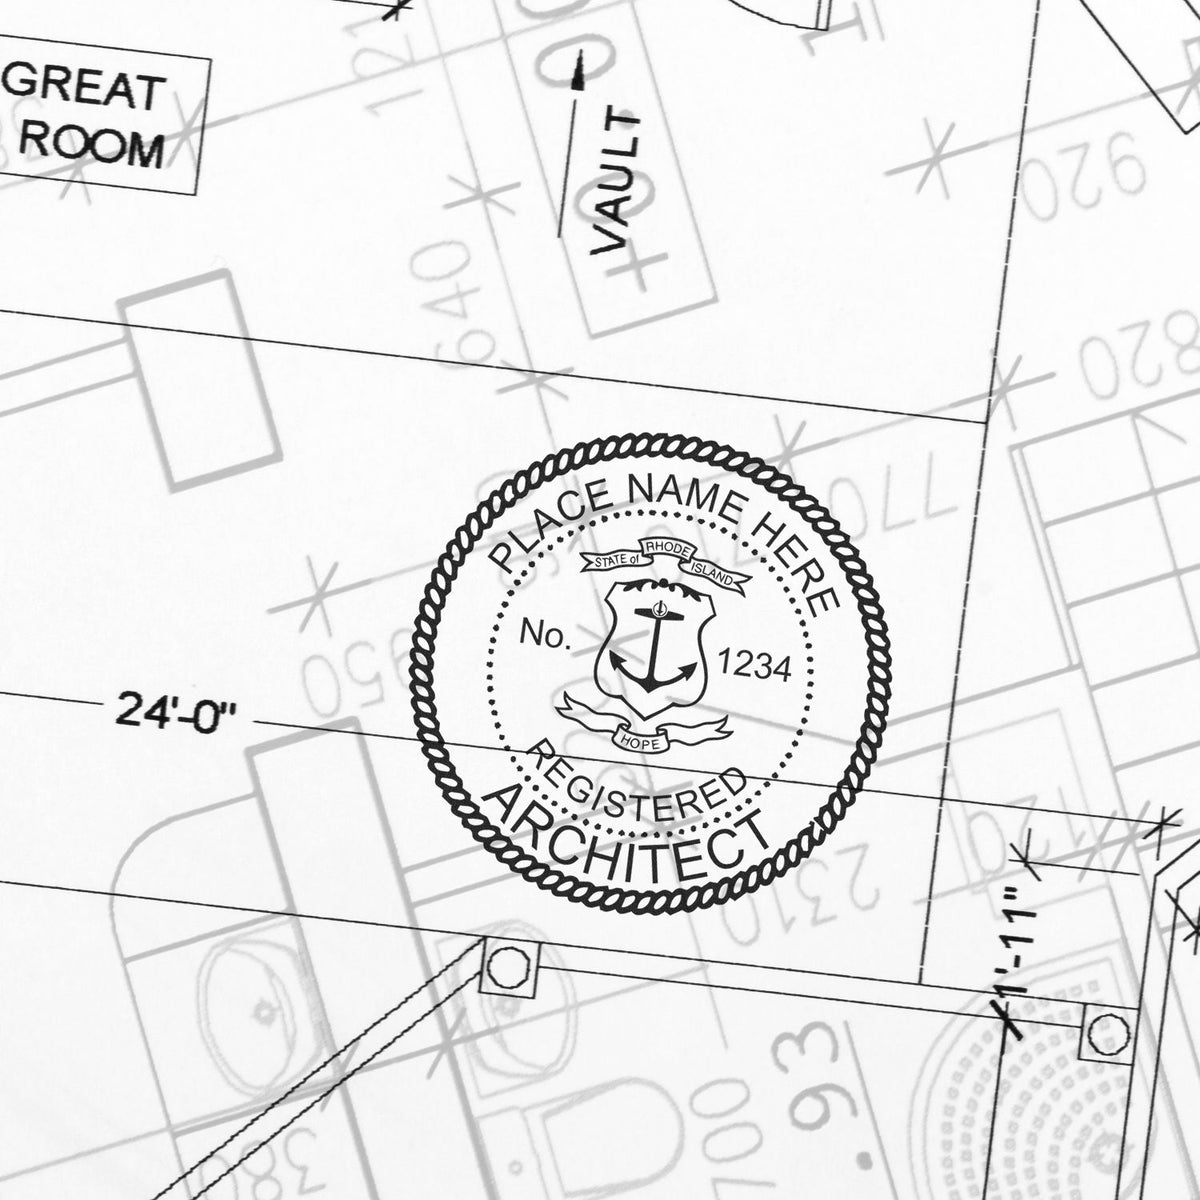 A stamped impression of the Slim Pre-Inked Rhode Island Architect Seal Stamp in this stylish lifestyle photo, setting the tone for a unique and personalized product.